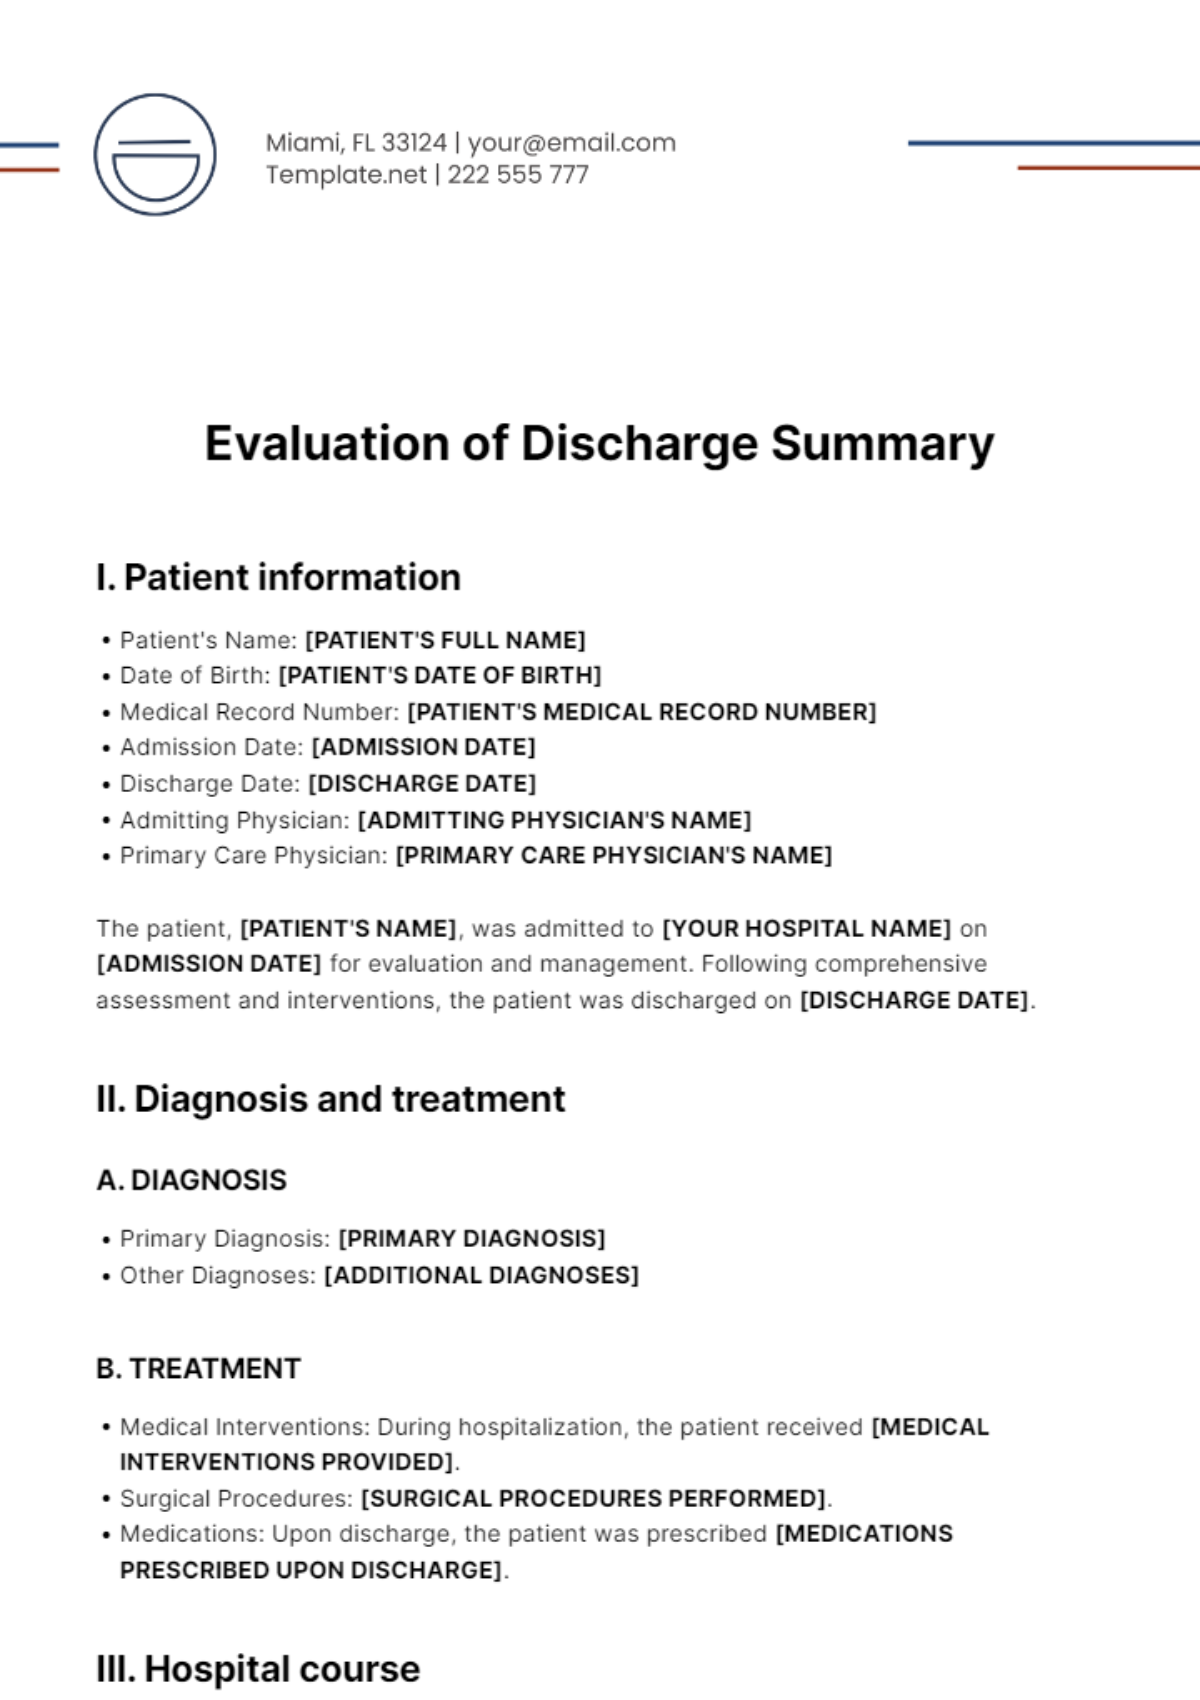 Evaluation of Discharge Summary Template